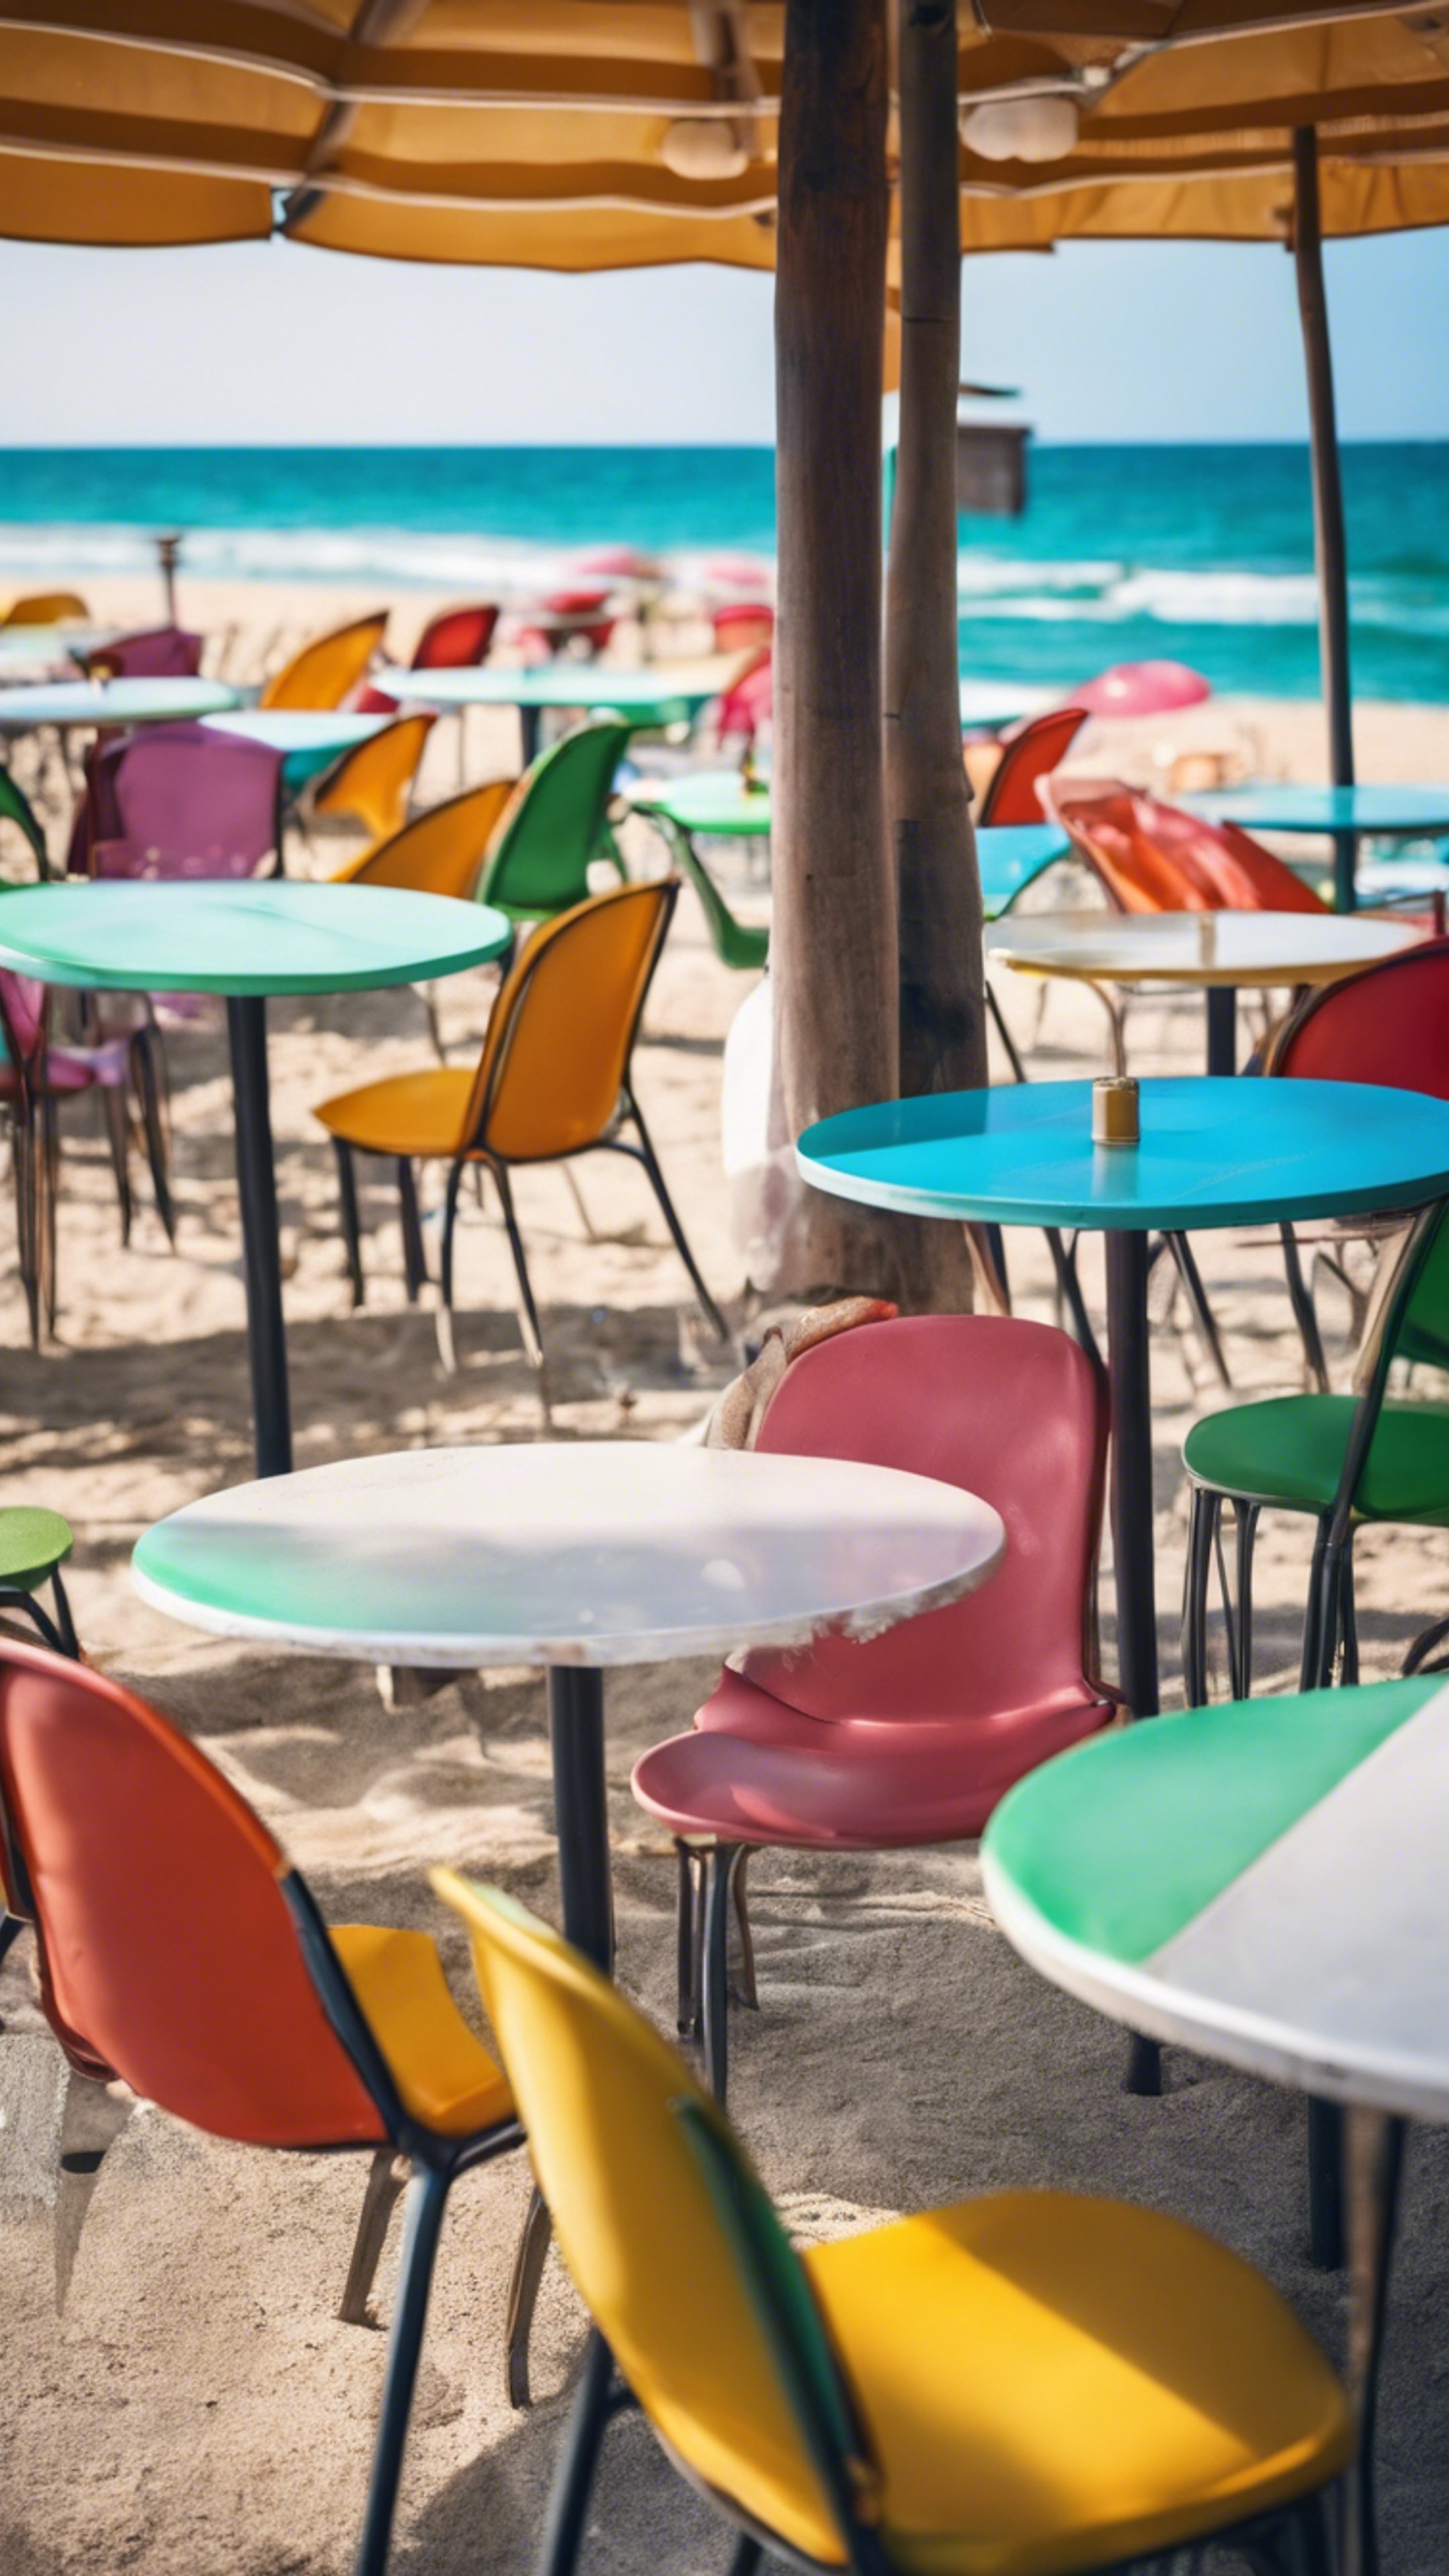 A beach side cafe with colorful chairs, umbrellas, and a panoramic view of the ocean. Wallpaper[e8a344cbd52d49a3867e]